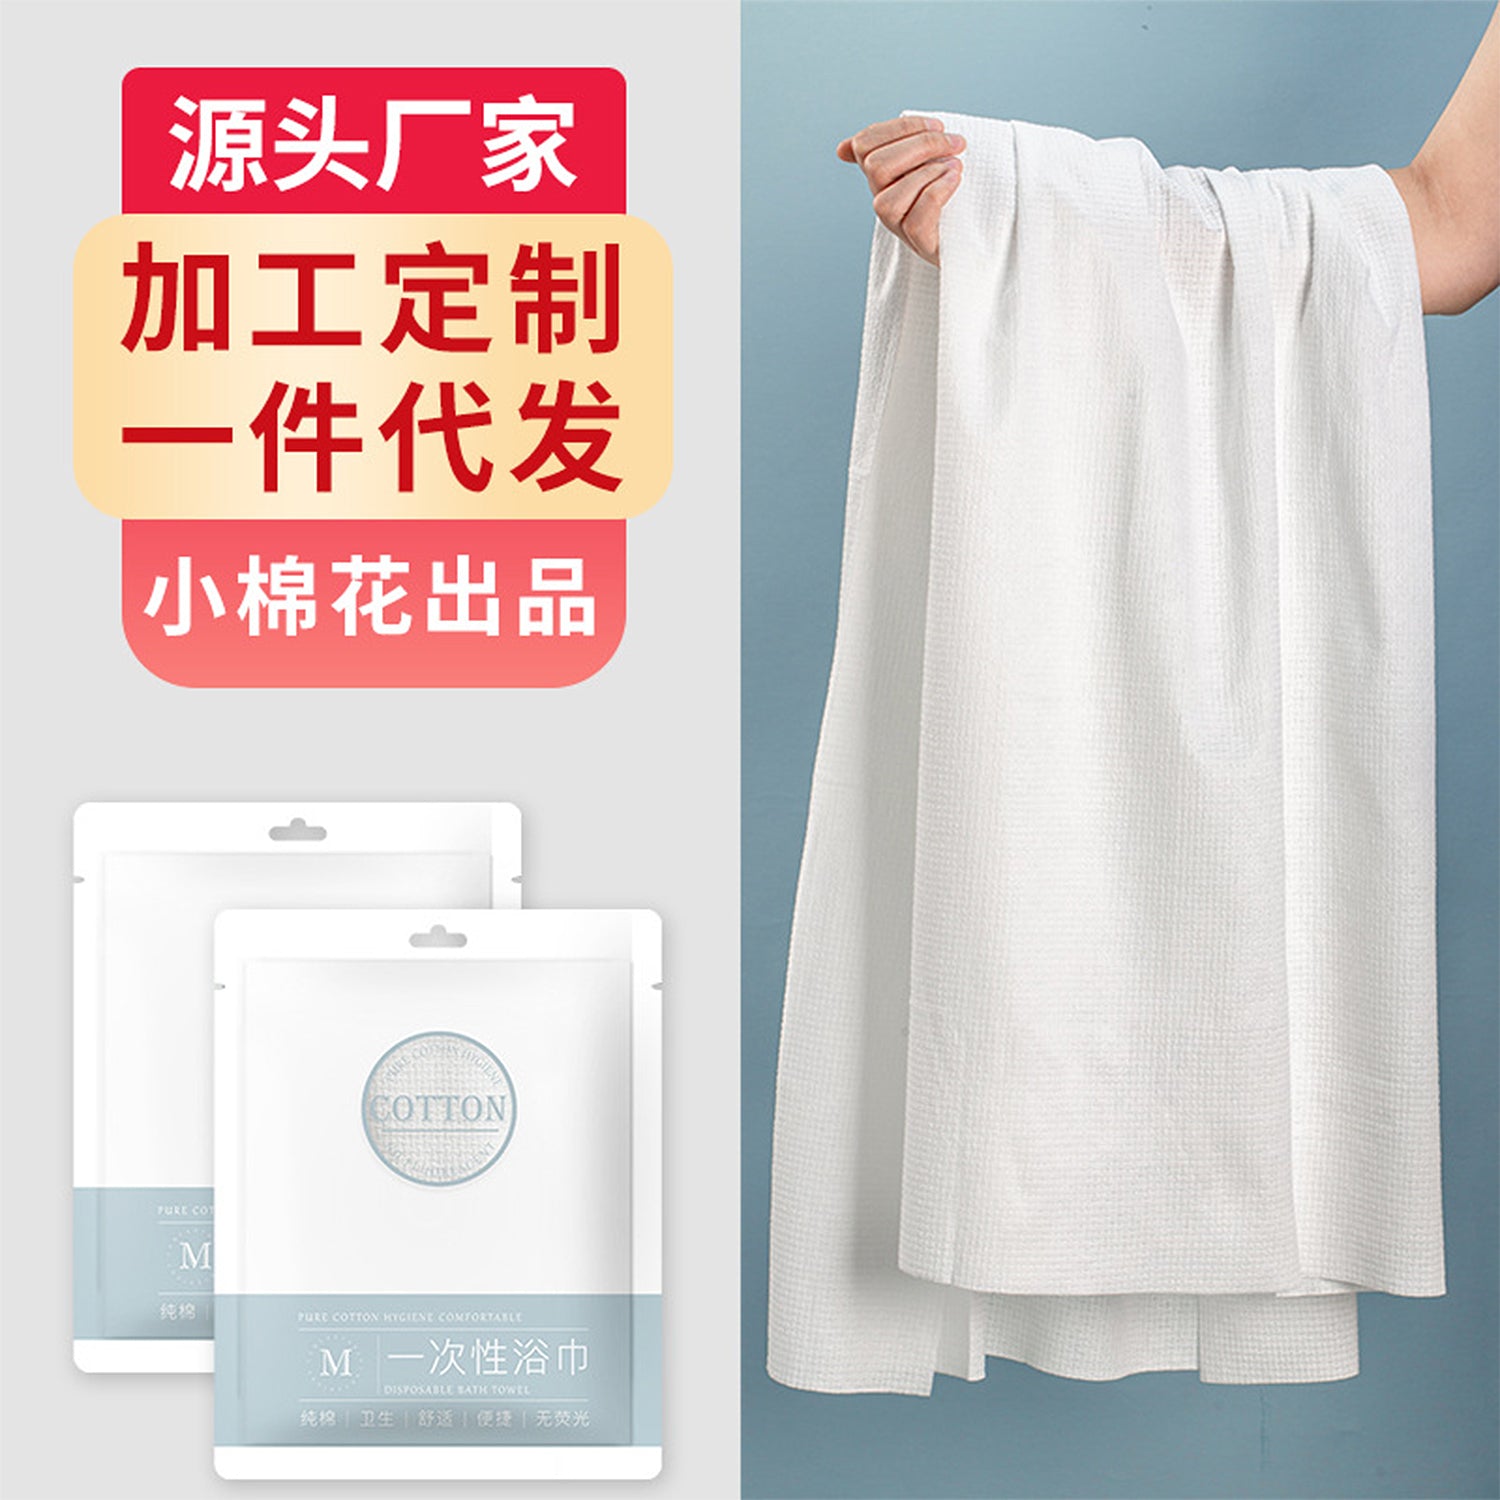 Disposable Towel And Bath Towel Set For Hotel Amenities, Travel, And Business Trips